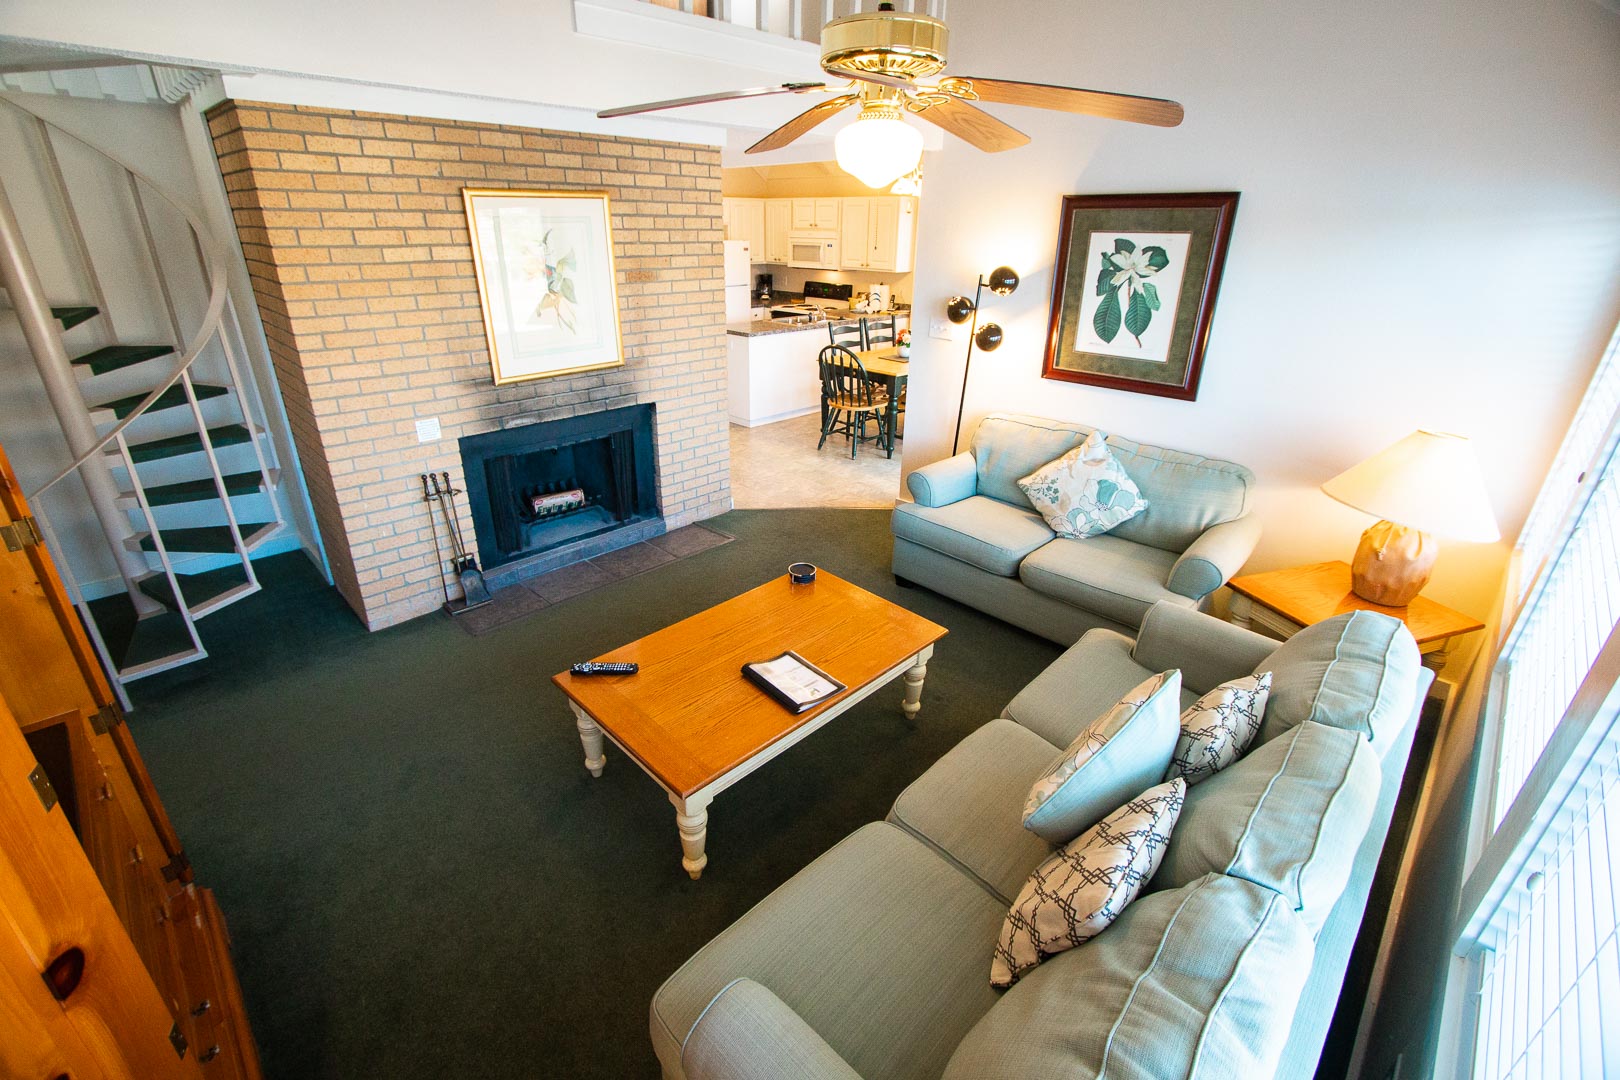 A view of the living room with staircase to the loft at VRI's Waterwood Townhomes in New Bern, North Carolina.